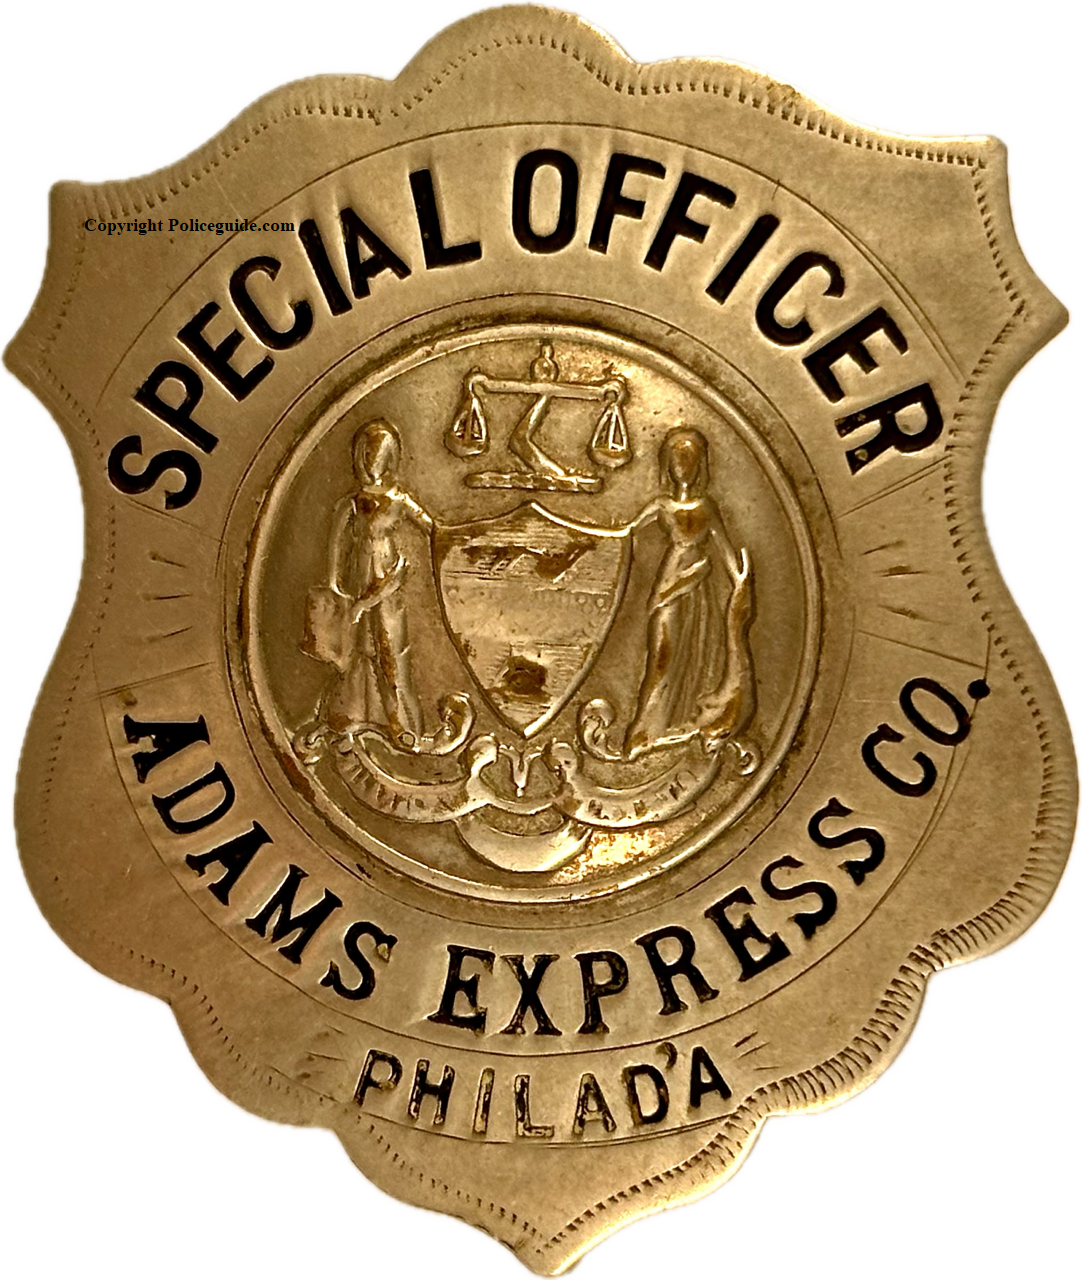 Adams Express Co. Special Officer Philad’a badge.  Made by Wm Davis & Son Philadelphia.  #35 stamped on the reverse.  